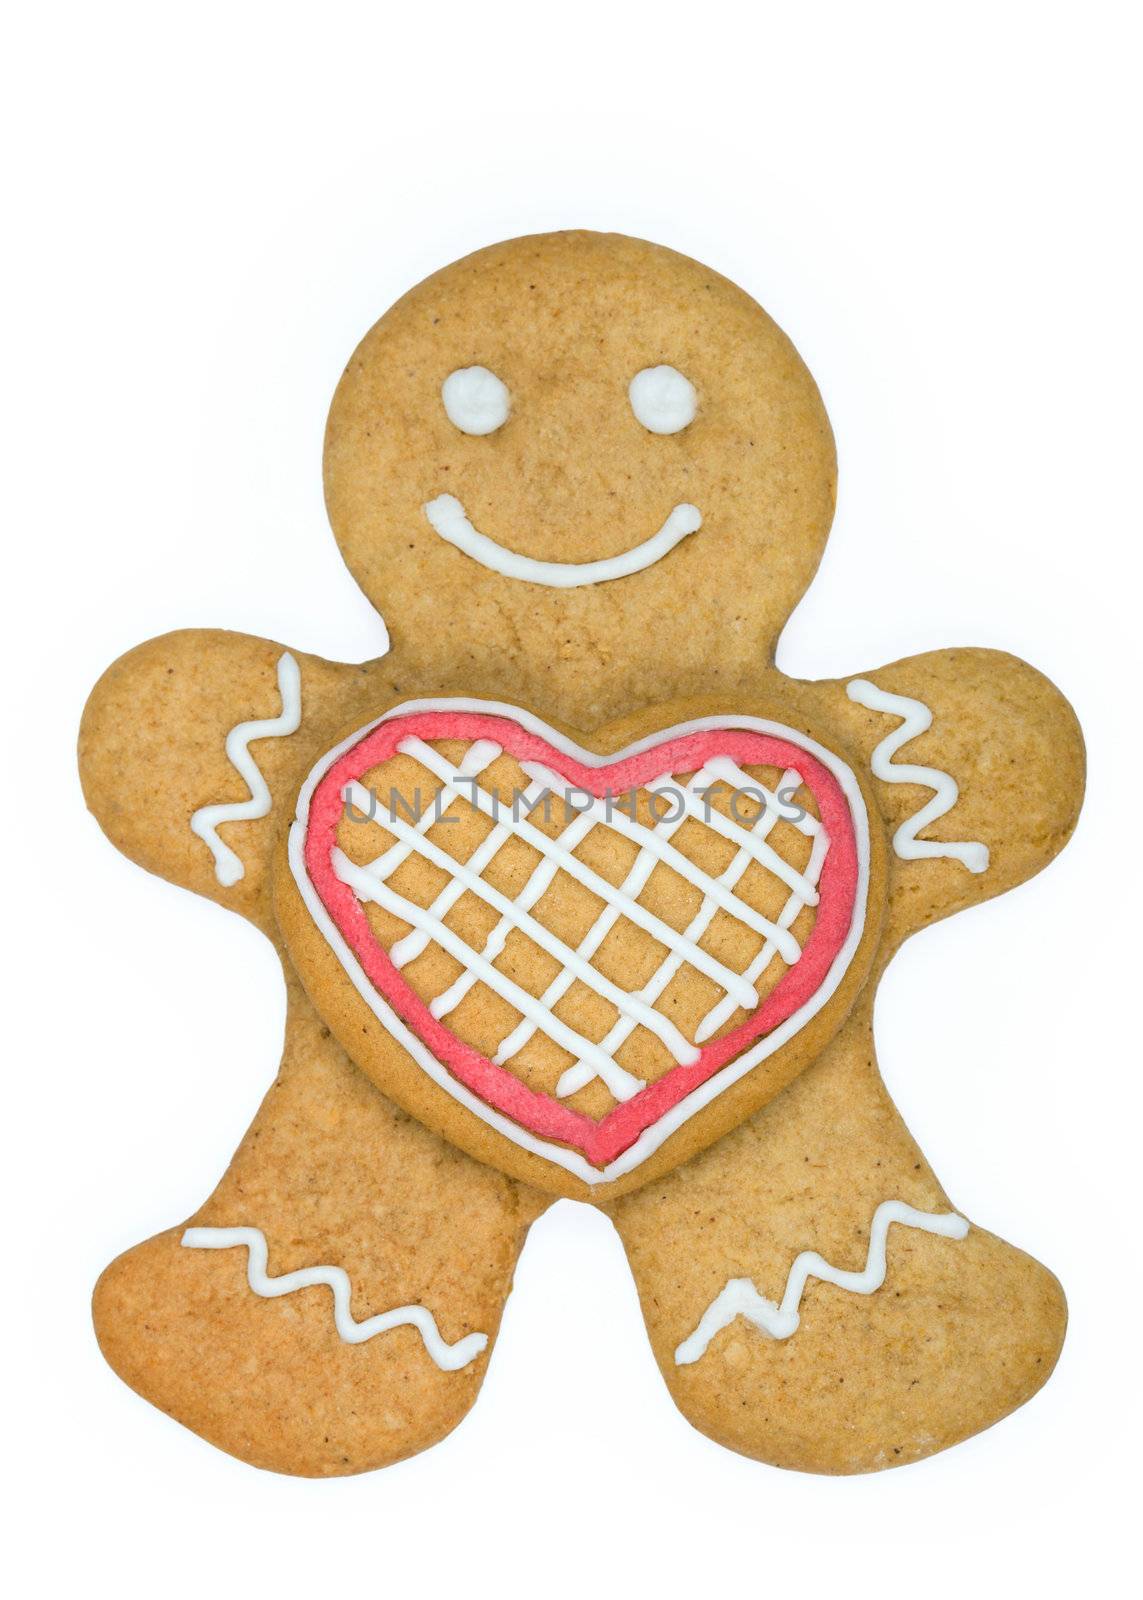 Gingerbread man holding a heart shaped cookie